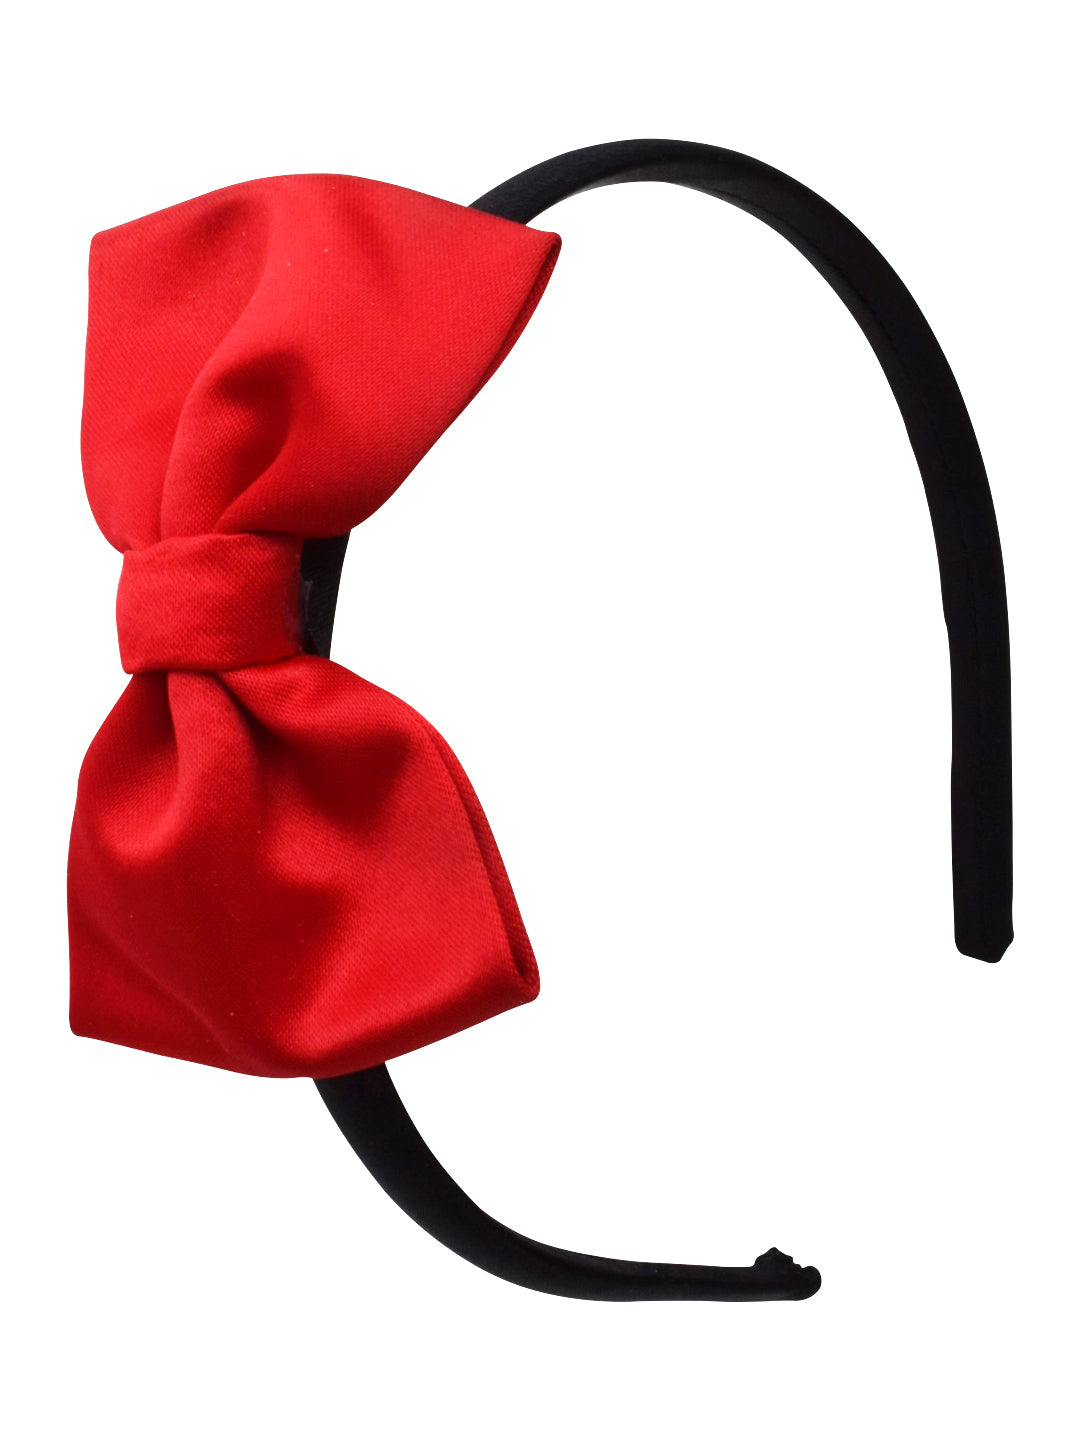 Red Bow on Black Satin